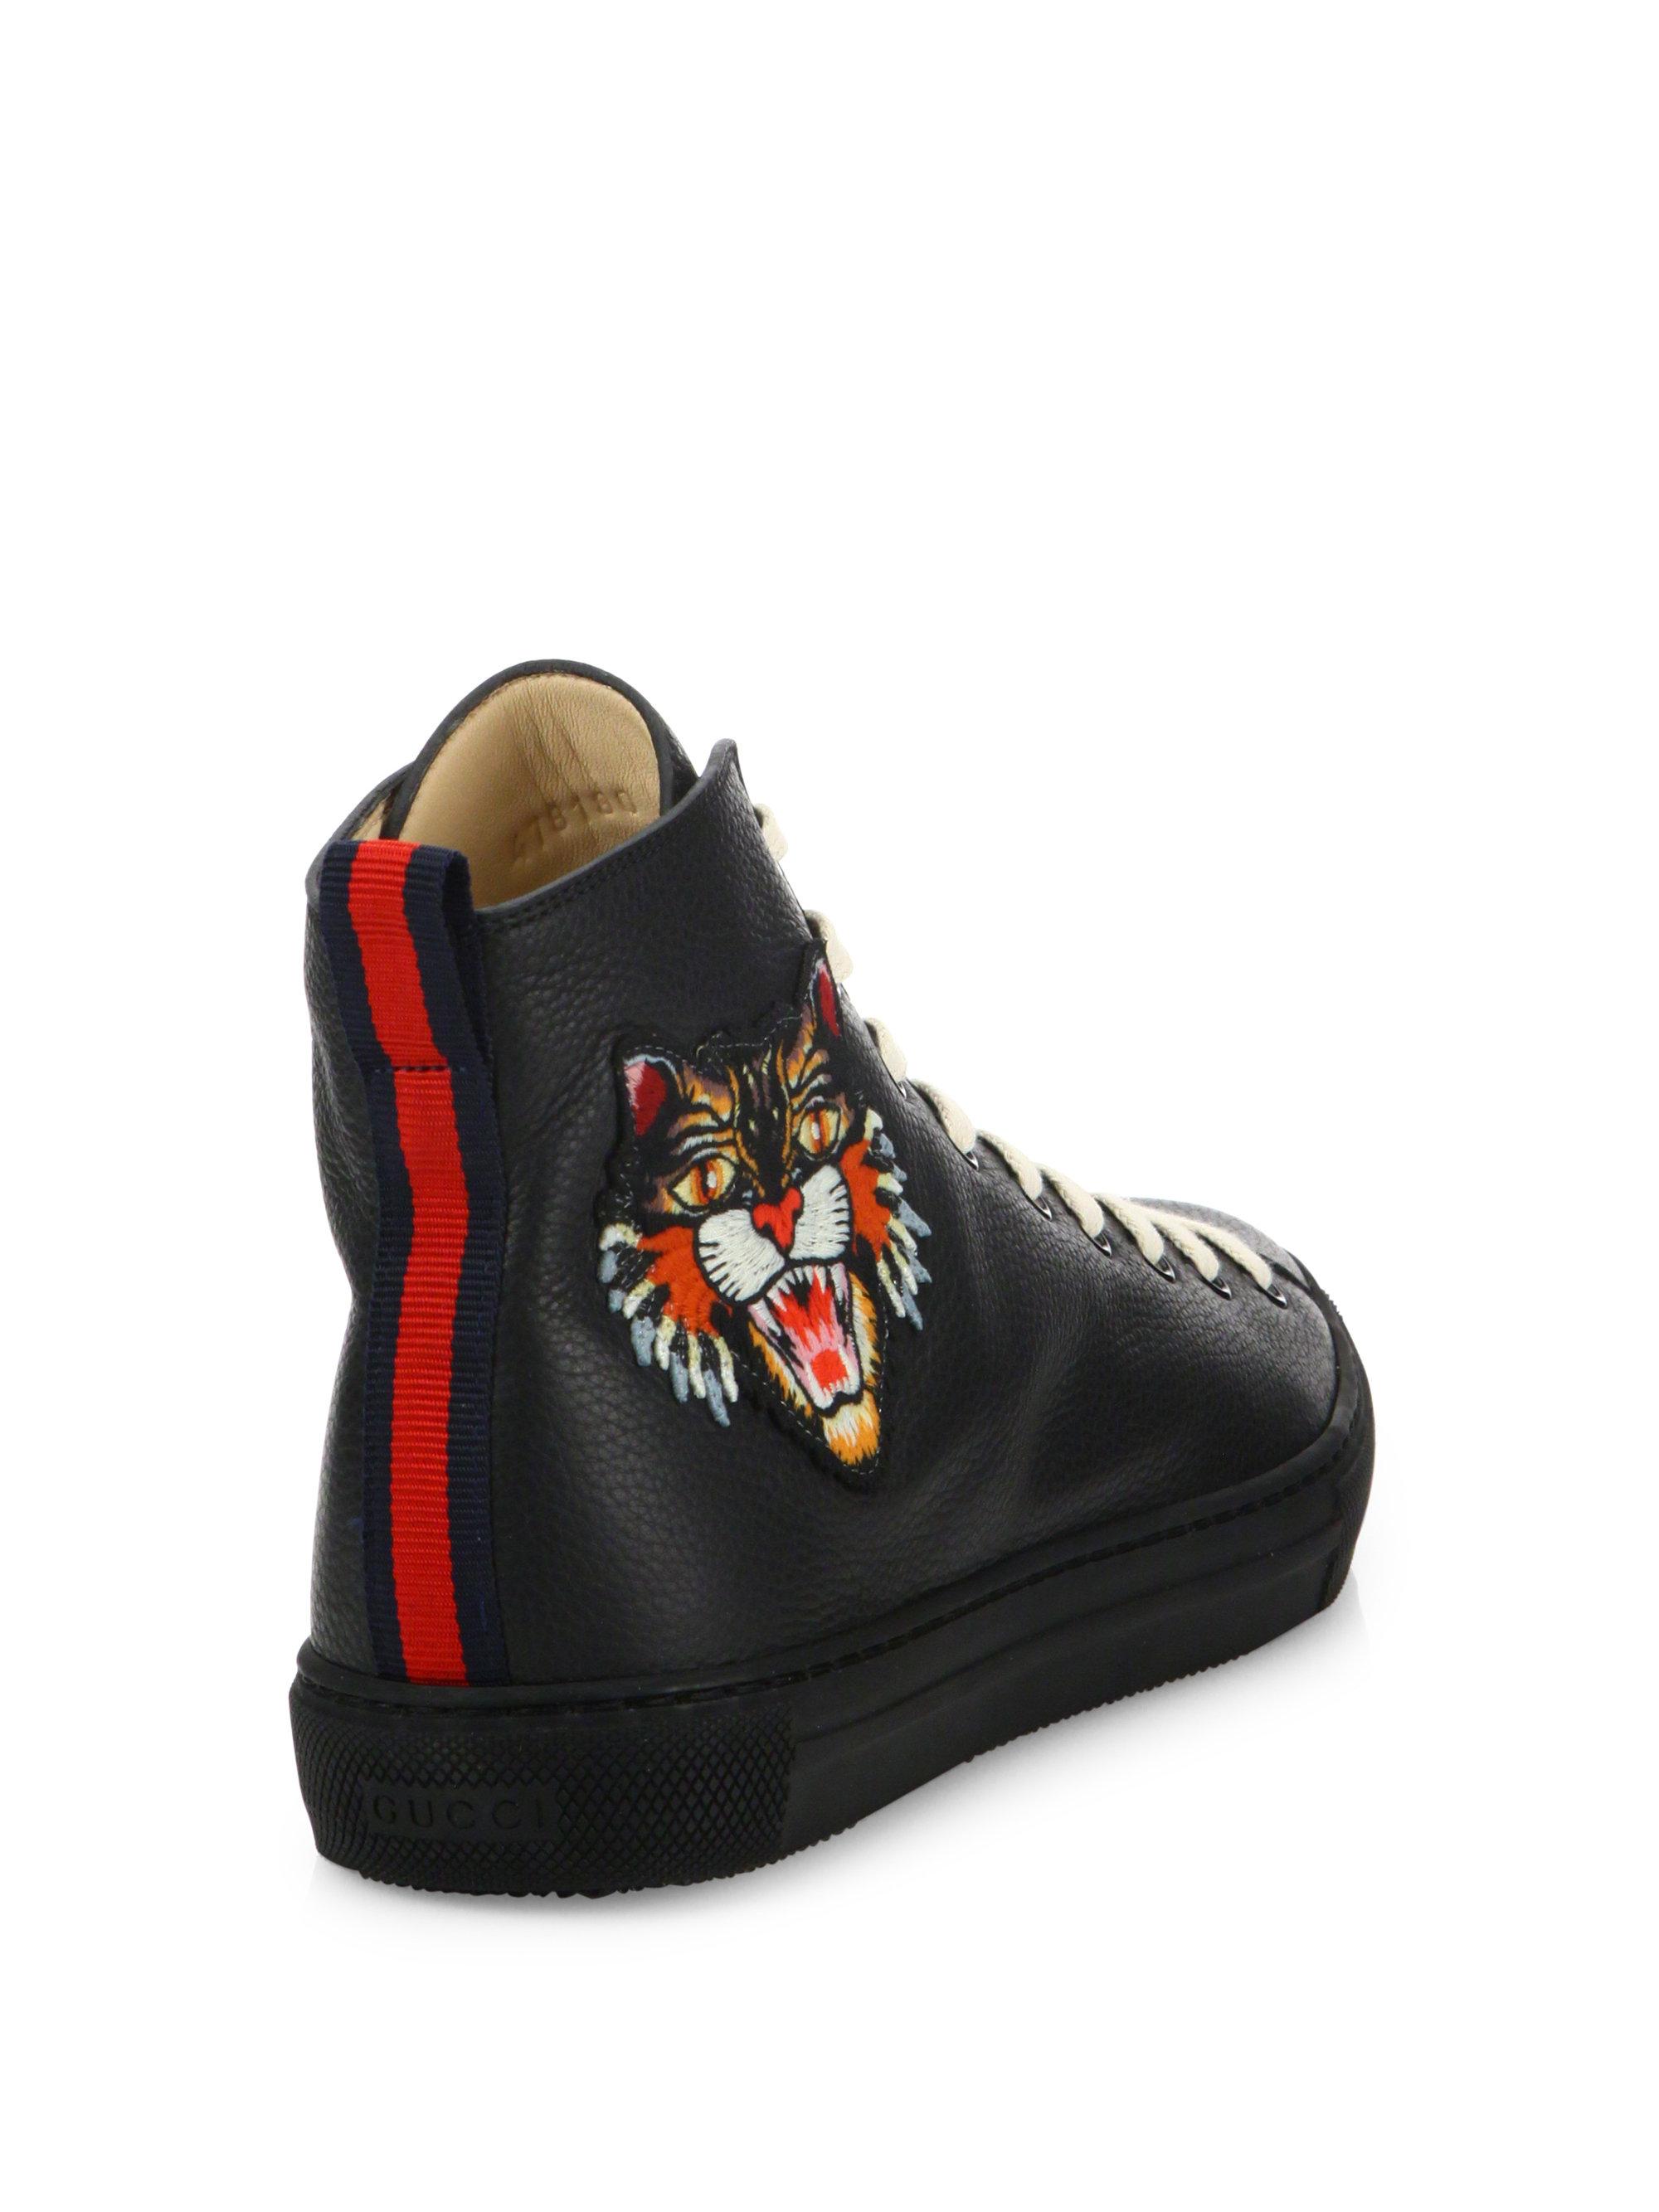 Gucci Major Tiger Ufo Embroidered Leather High-top Sneakers in Black | Lyst